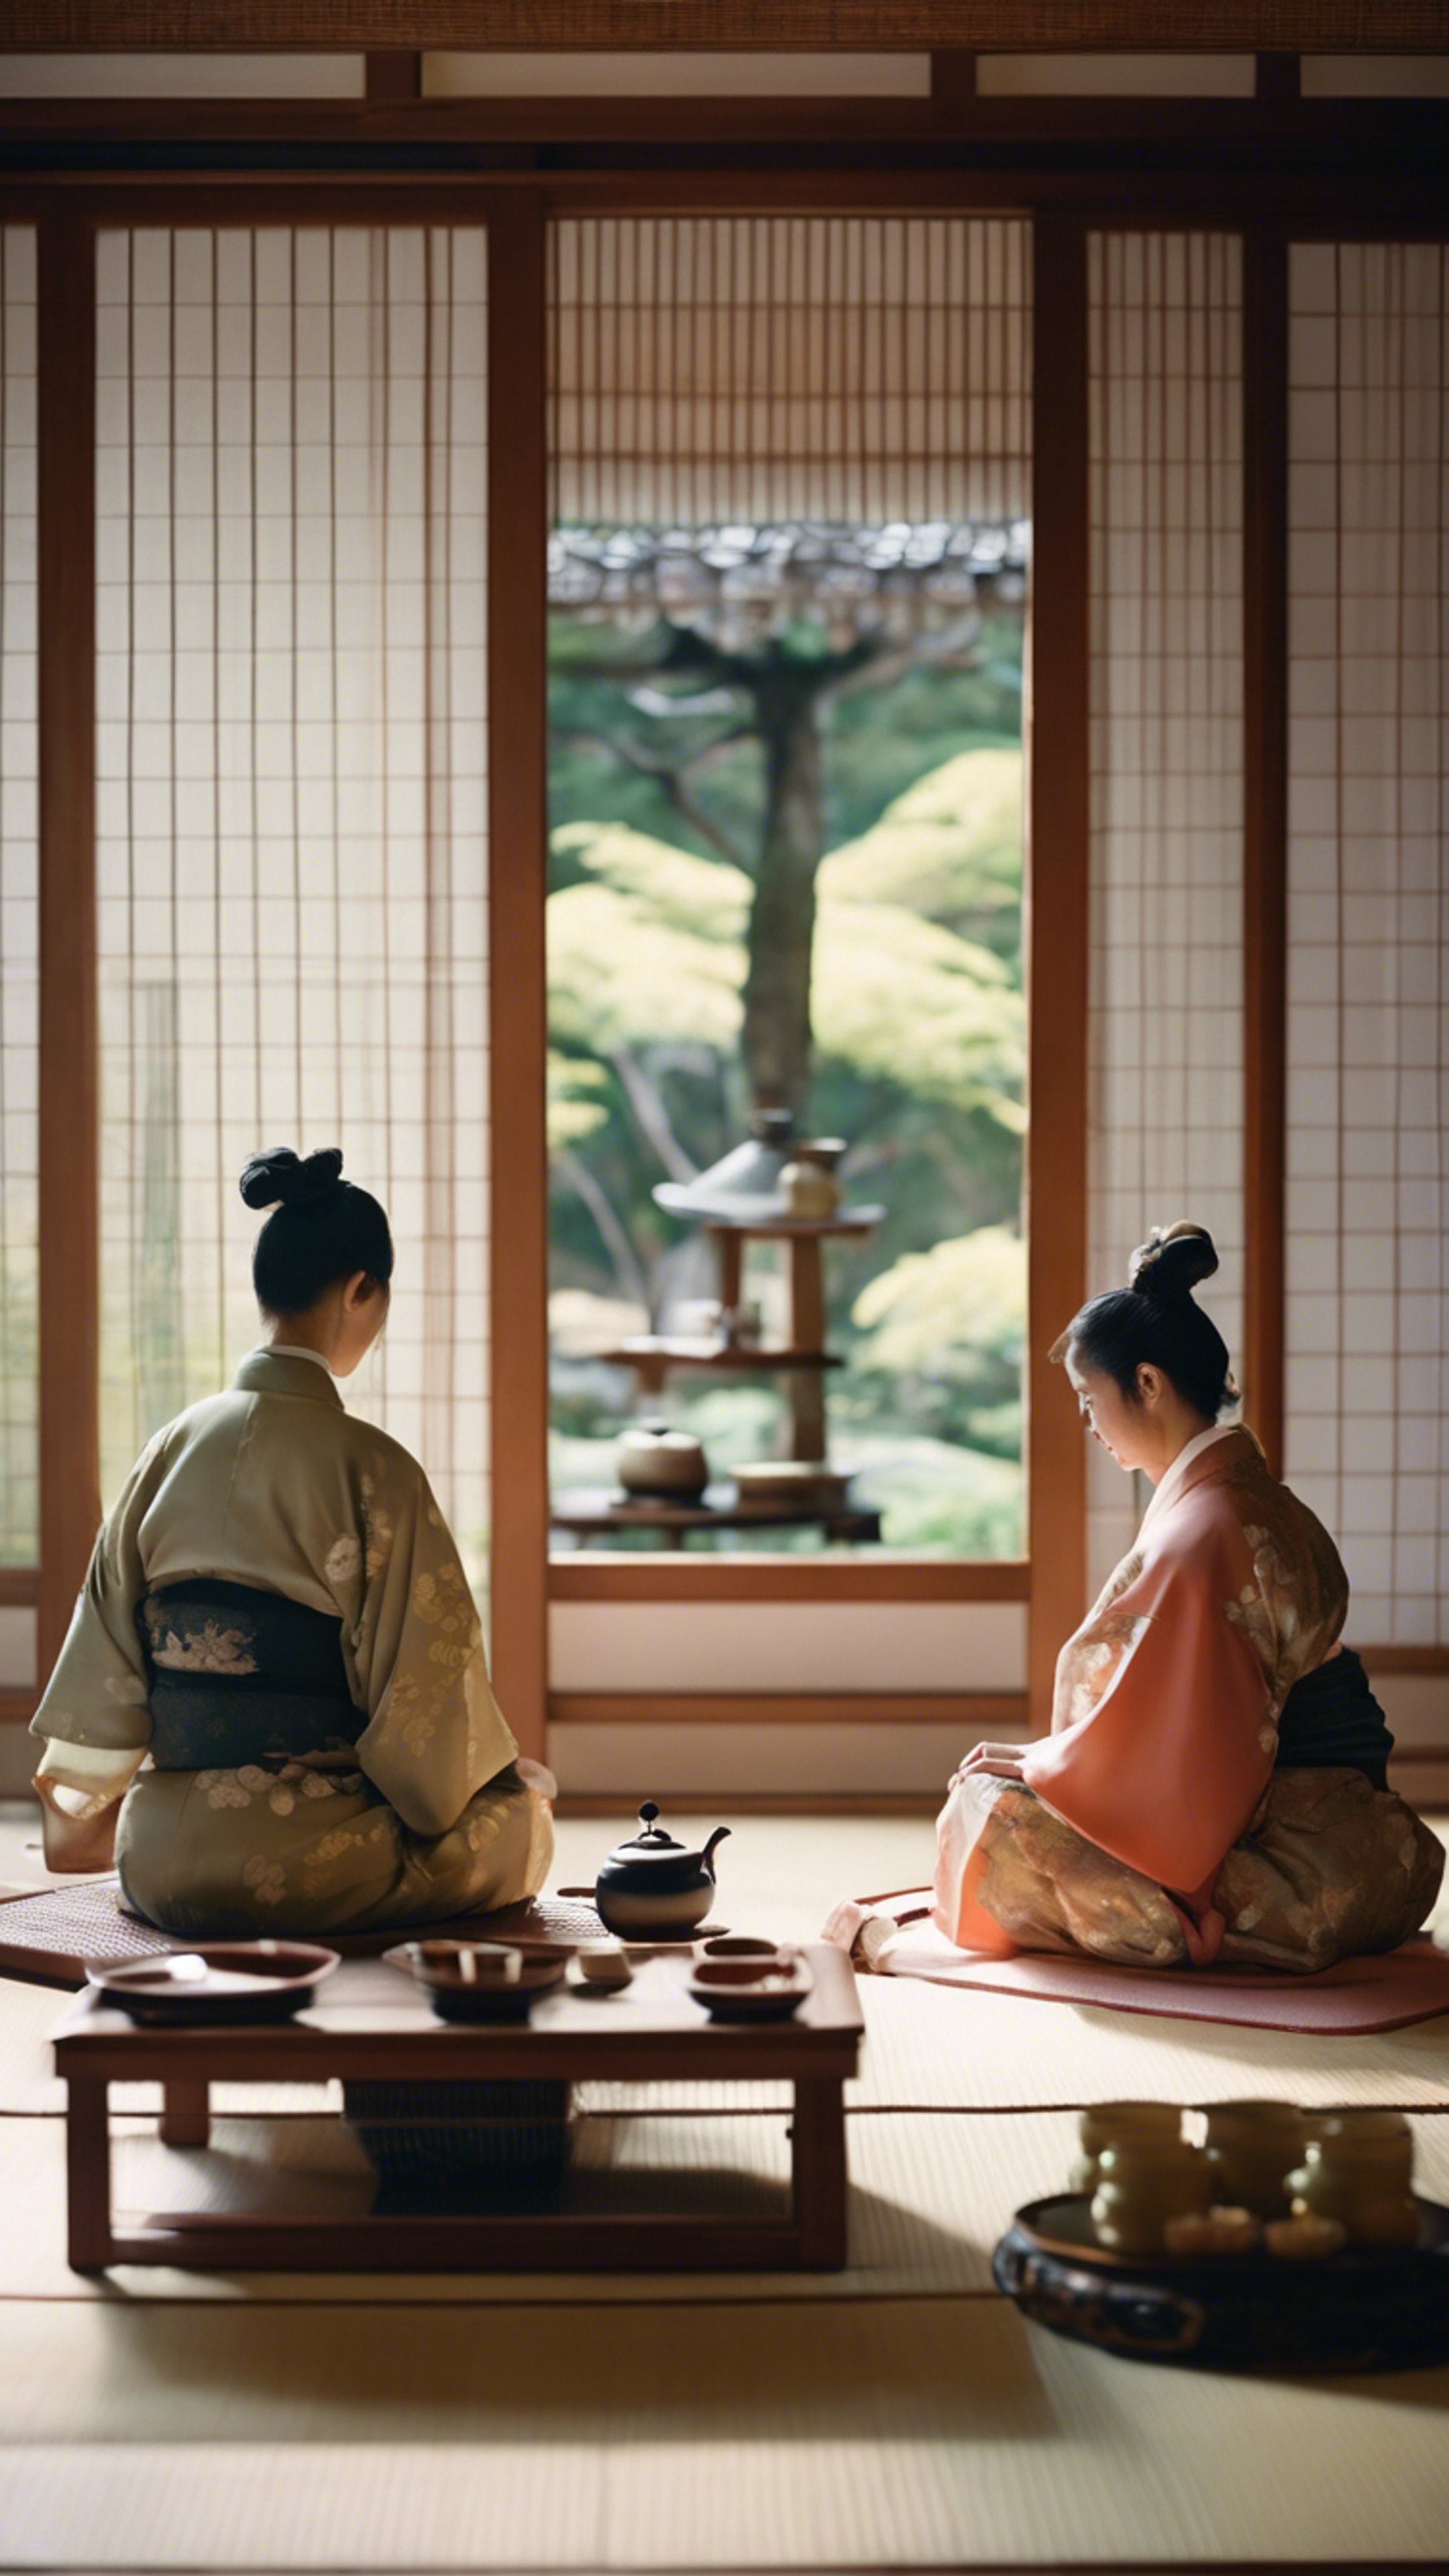 A peaceful traditional Japanese tea ceremony taking place in an ancient tea house, with the participants dressed in silk kimonos.壁紙[98a170067e414d32abbc]